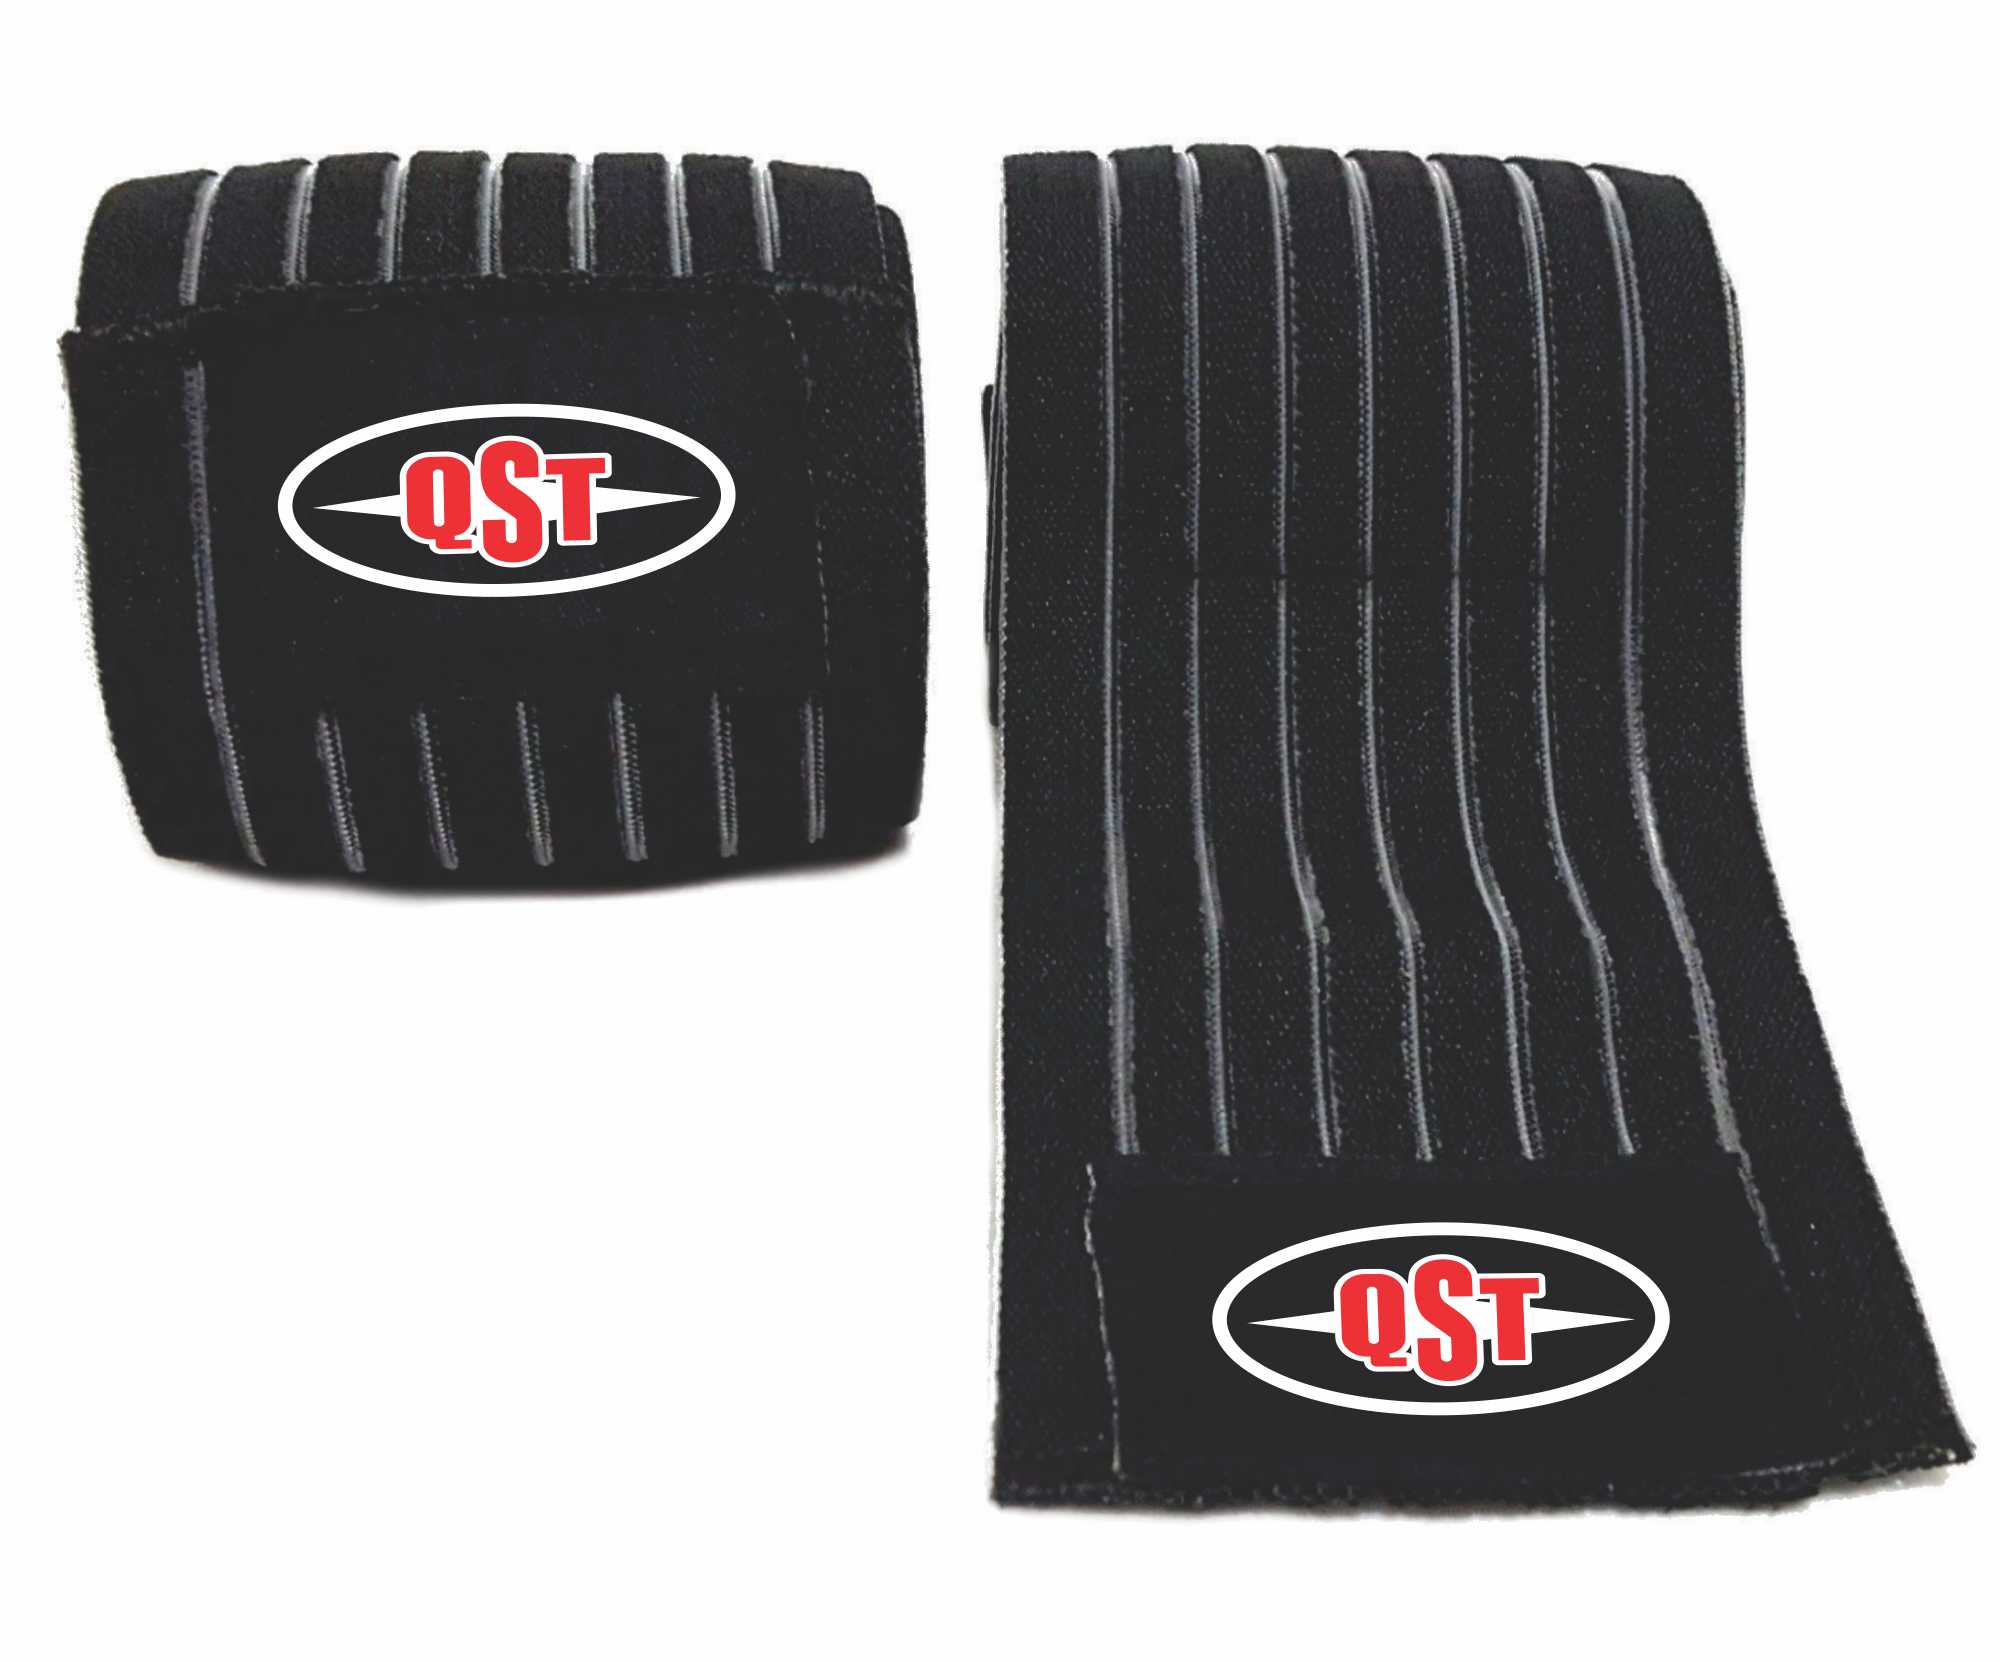 Weightlifting Knee Wraps - ACS-1524